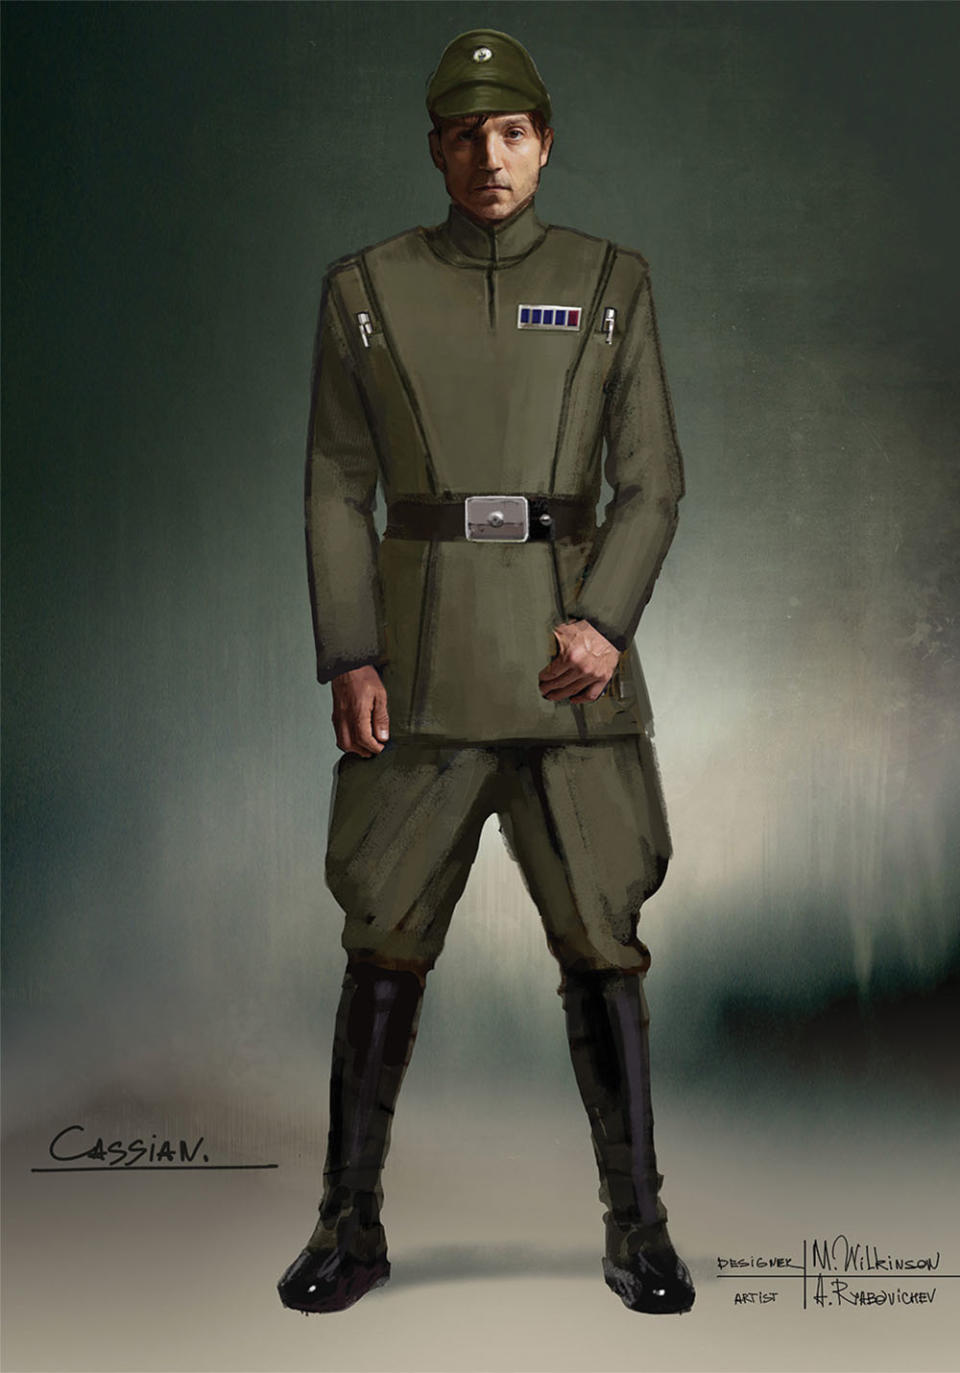 Concept art of Cassian in disguise.